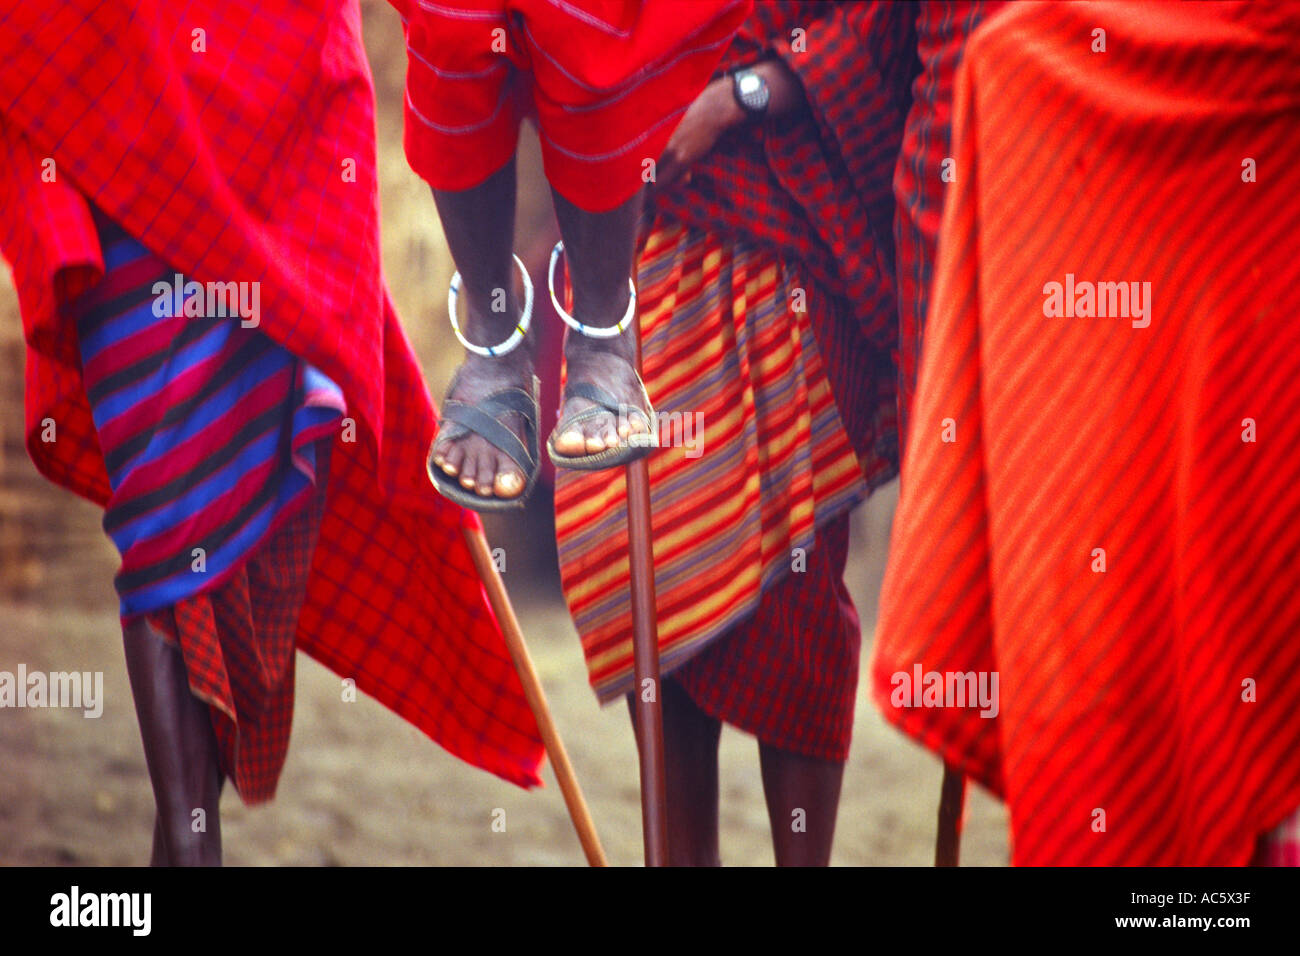 Masai tribesman performing ritual dance Serengetti Tanzania Masai tribesman Tanzania Red Robe Garb Tradition African Culture Stock Photo